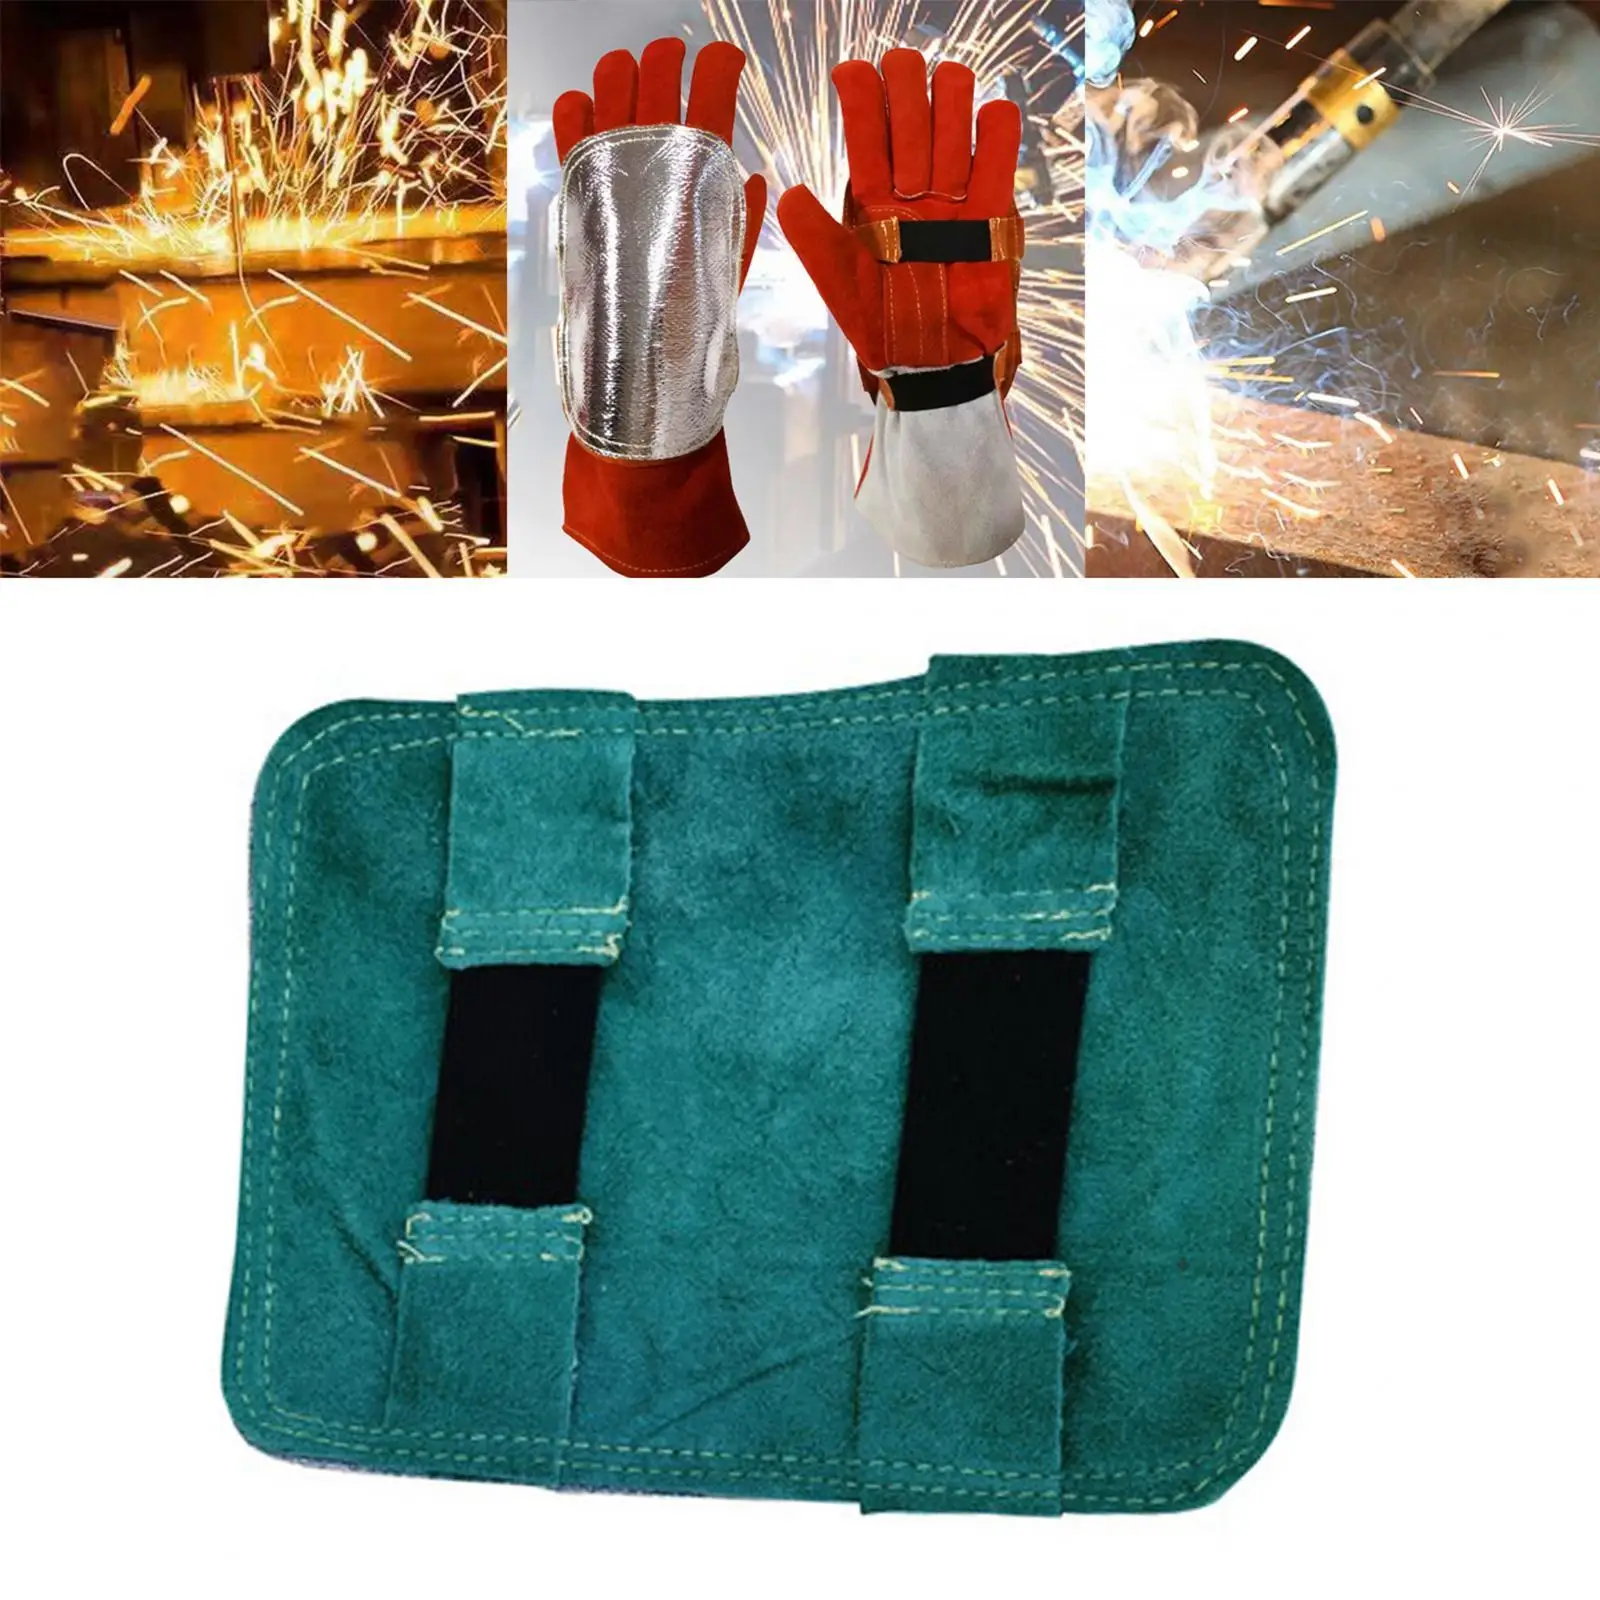 Leather Heat Shield High Temperature Resistant Welding Hands Shield for Welding Camping Cutting Metal Smelting Industrial Boiler